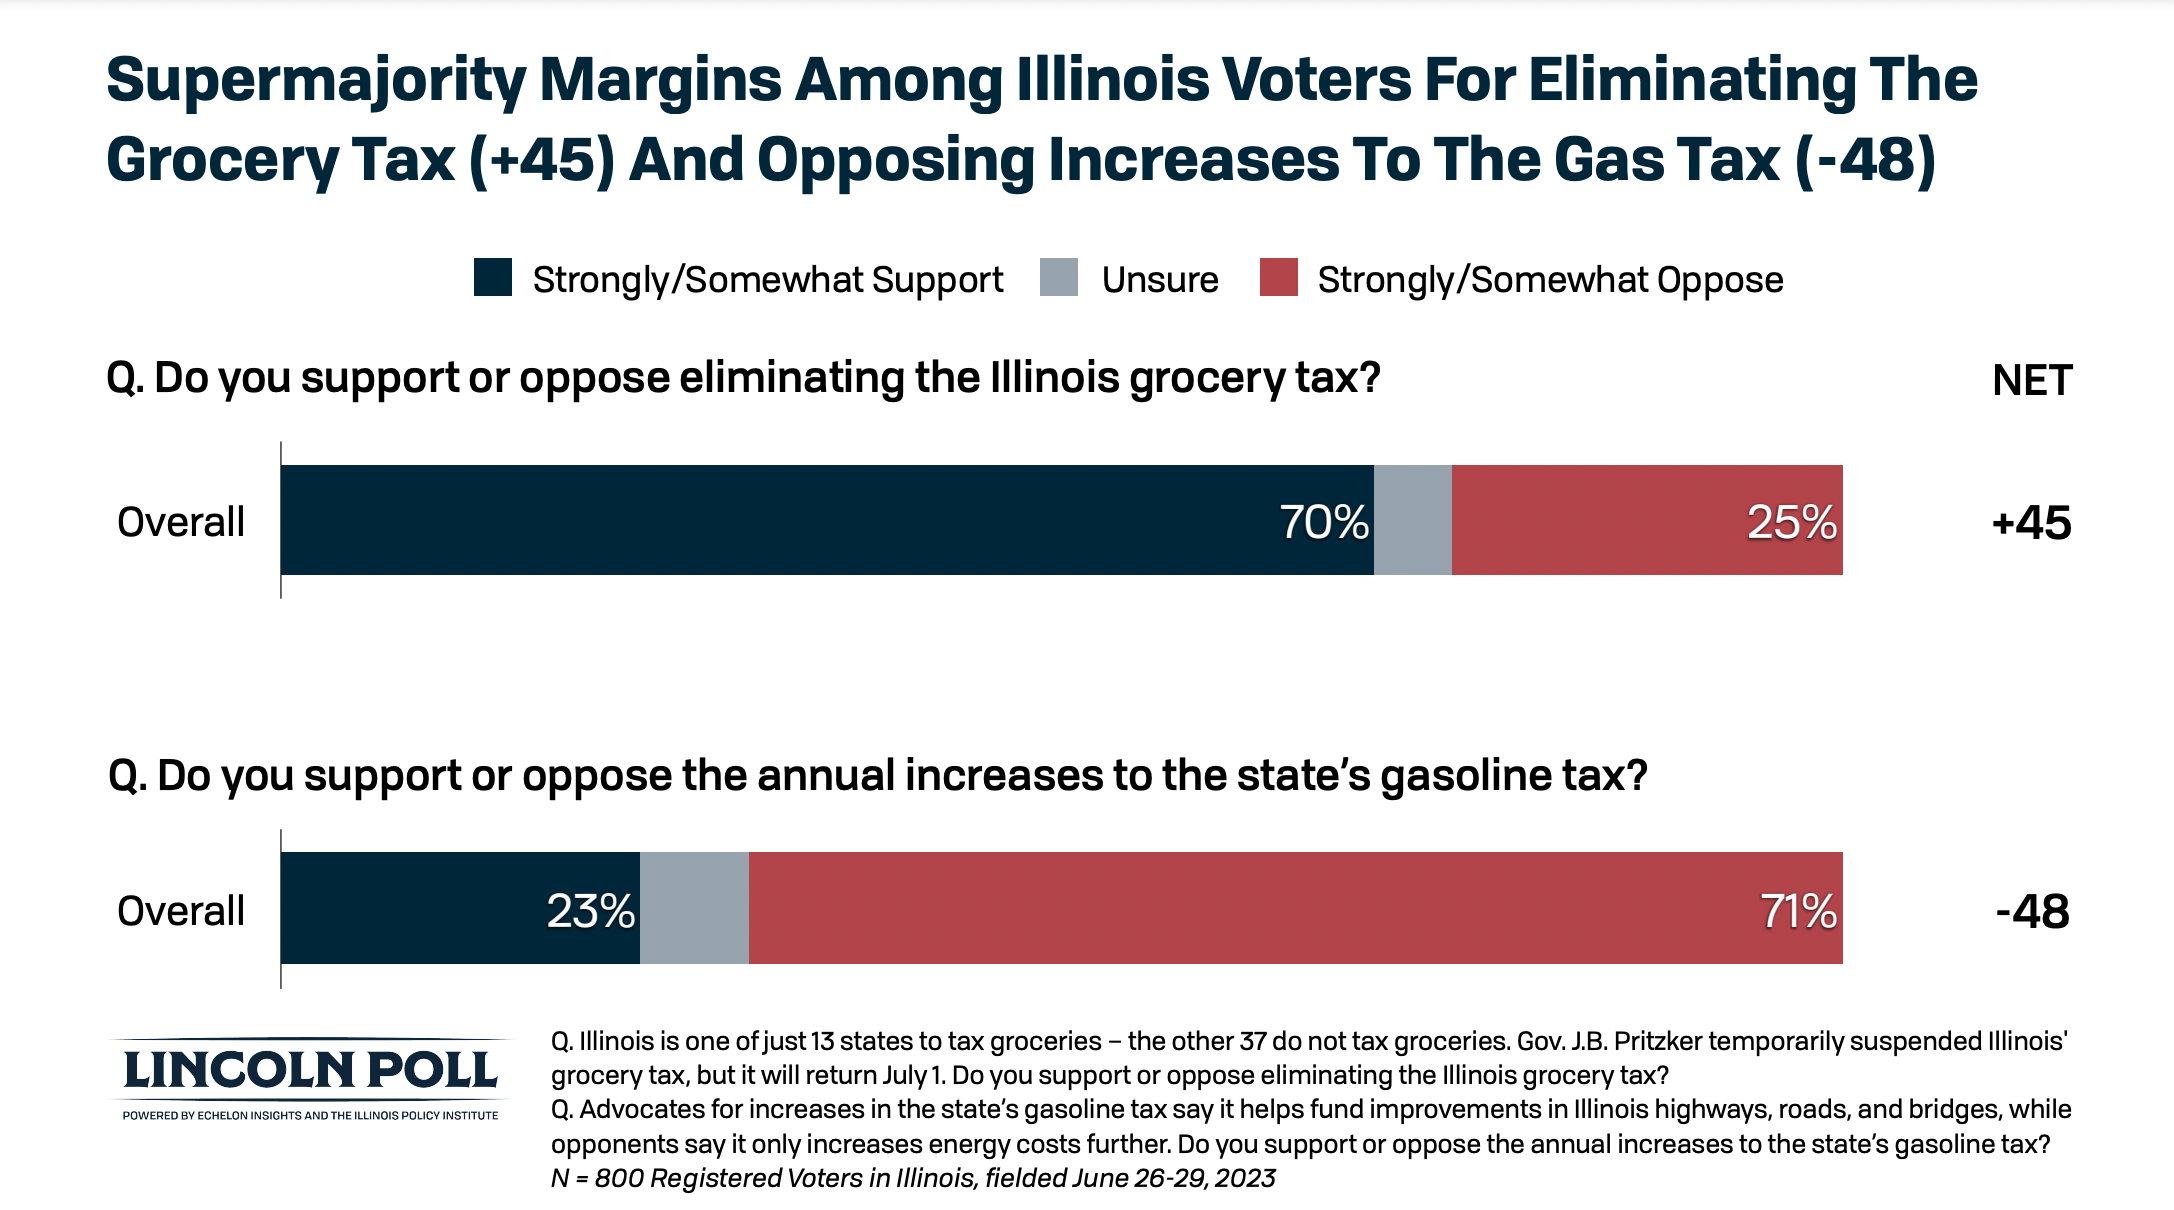 Supermajority margins among Illinois voters: oppose grocery, gas taxes